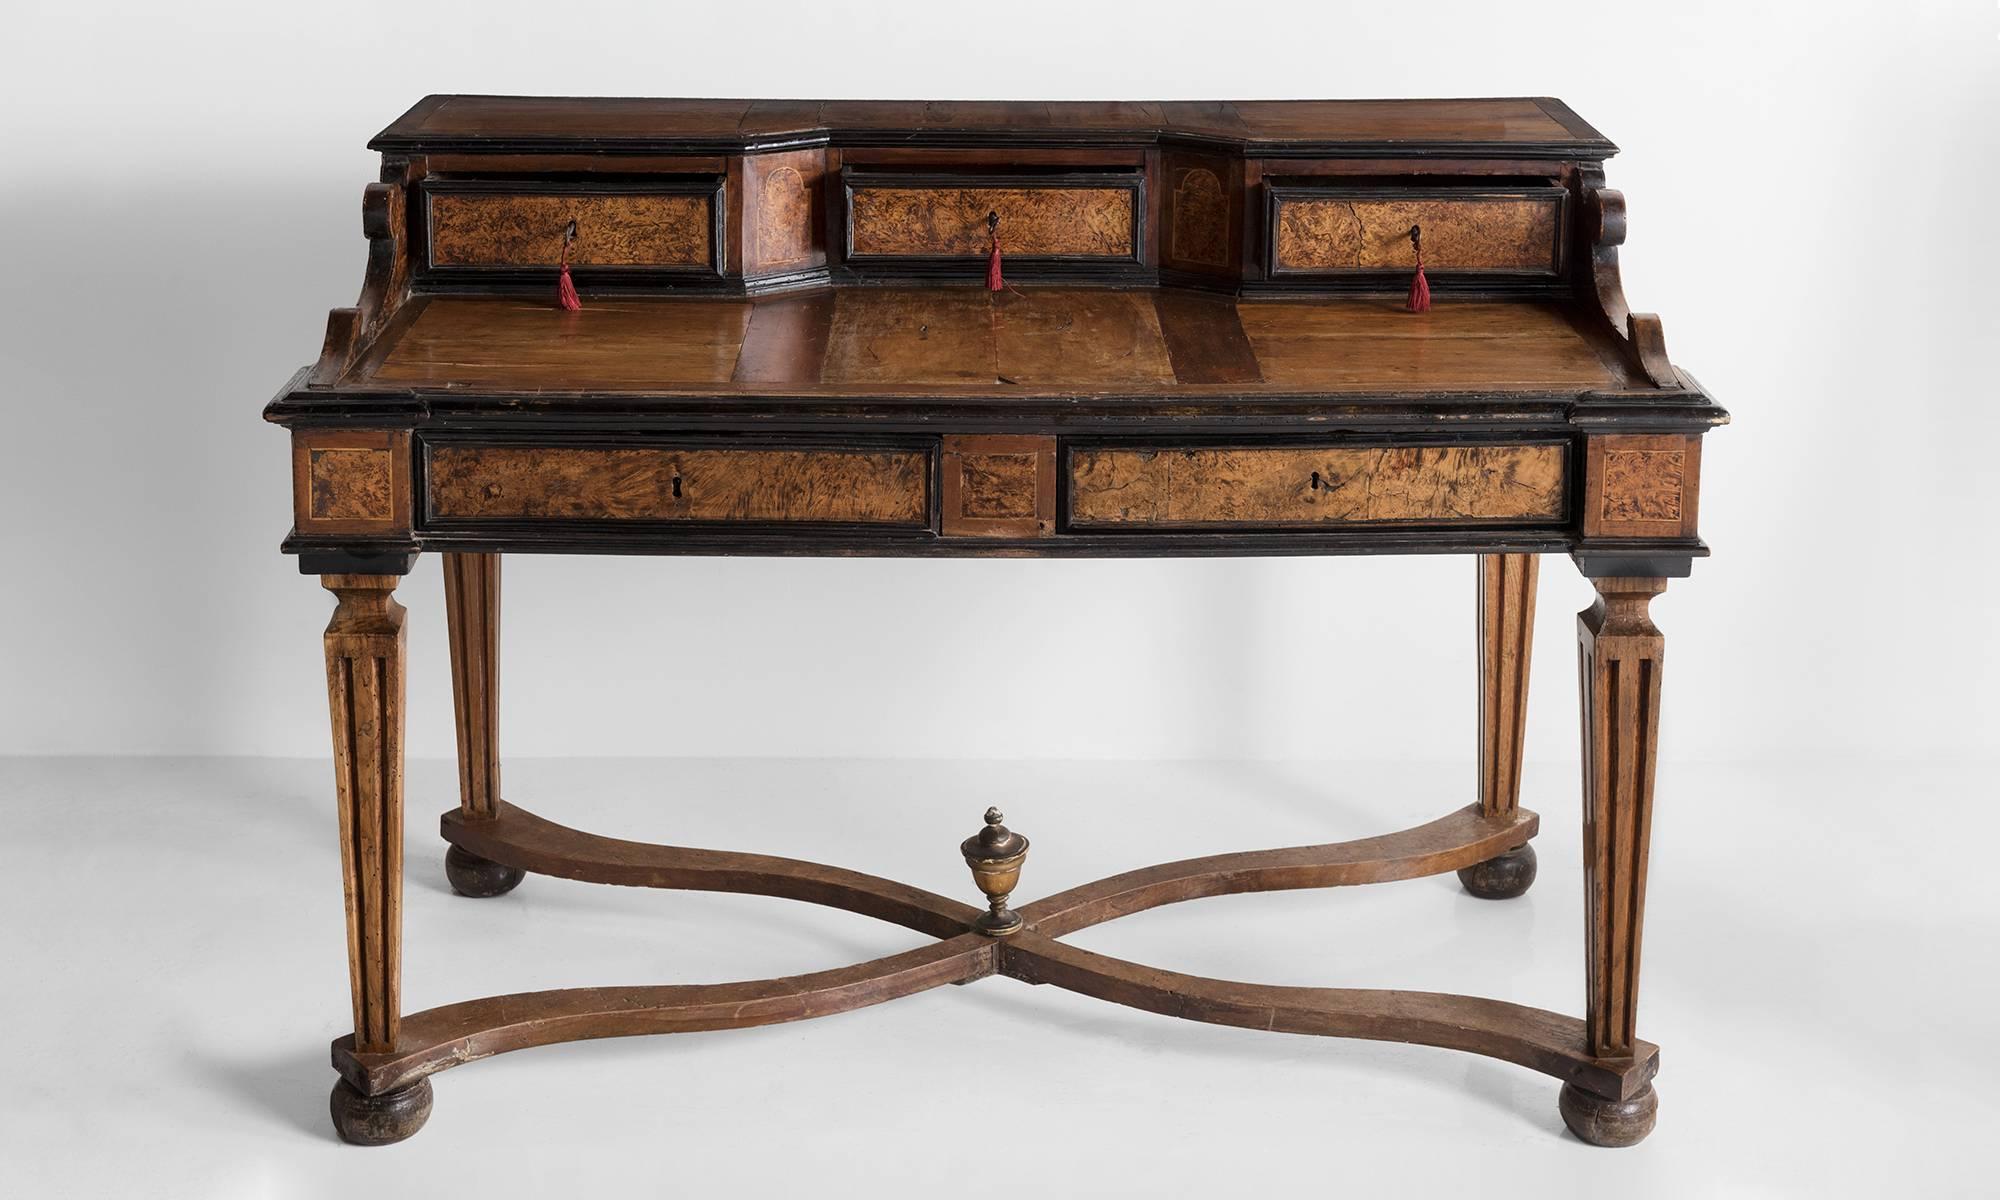 Fruitwood Writing Desk, England, circa 1870.

Luxurious fruitwood in various tones with ornate detailing throughout.